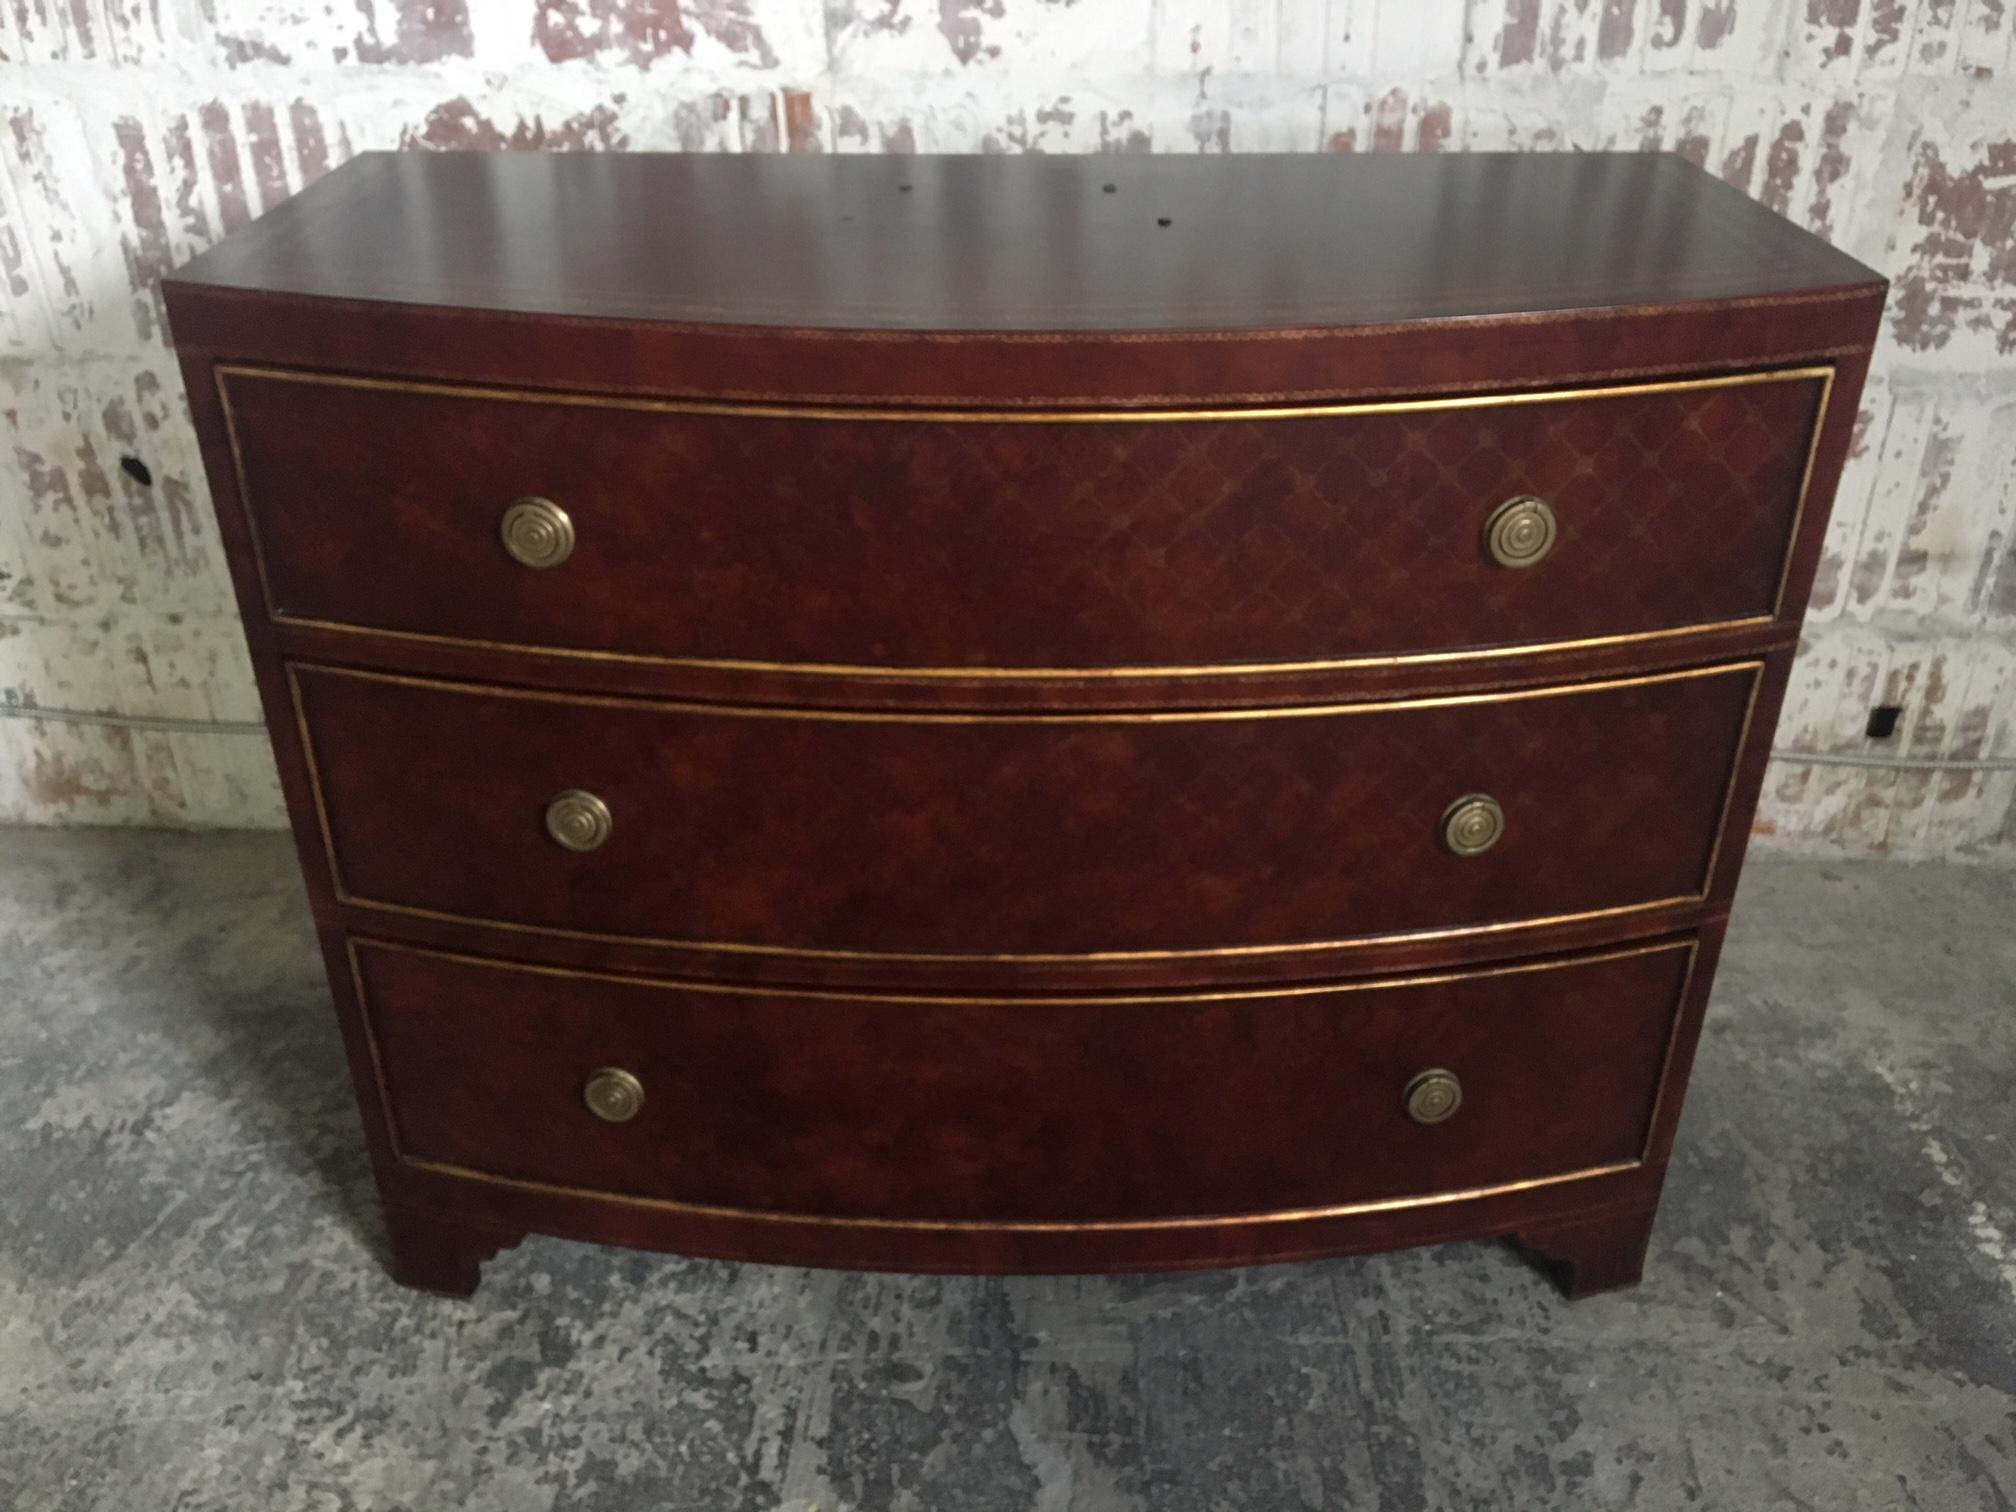 Three-drawer dresser by Ferguson Copeland, Ltd. features leather-wrapped finish accented with brass detailing and brass hardware. Good vintage condition, minor signs of use appropriate with age.